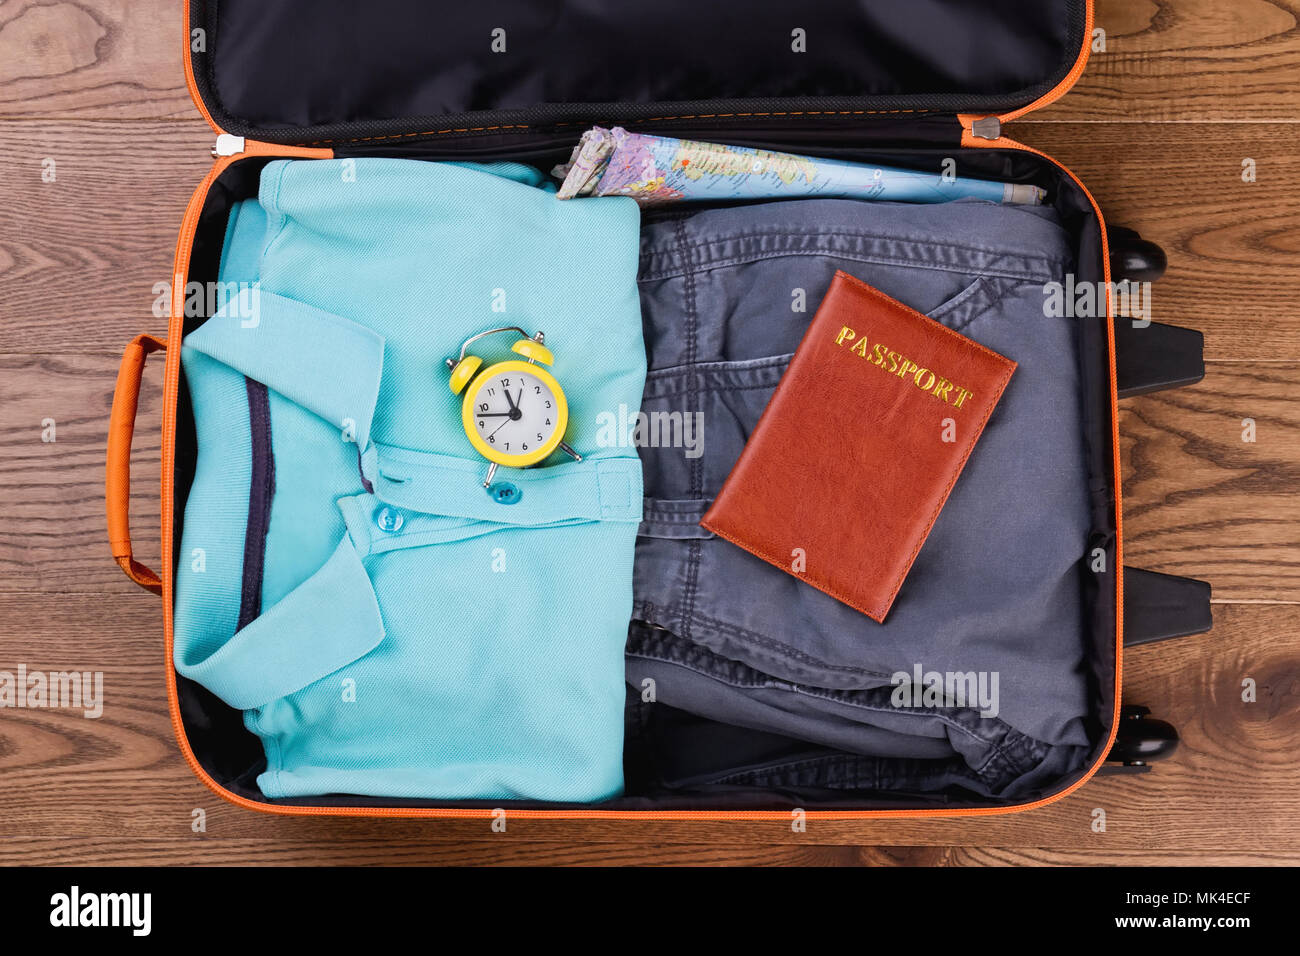 Packing suitcase for vacation top view. Flat lay. Male apparel, yellow alarm clock and passport. Stock Photo